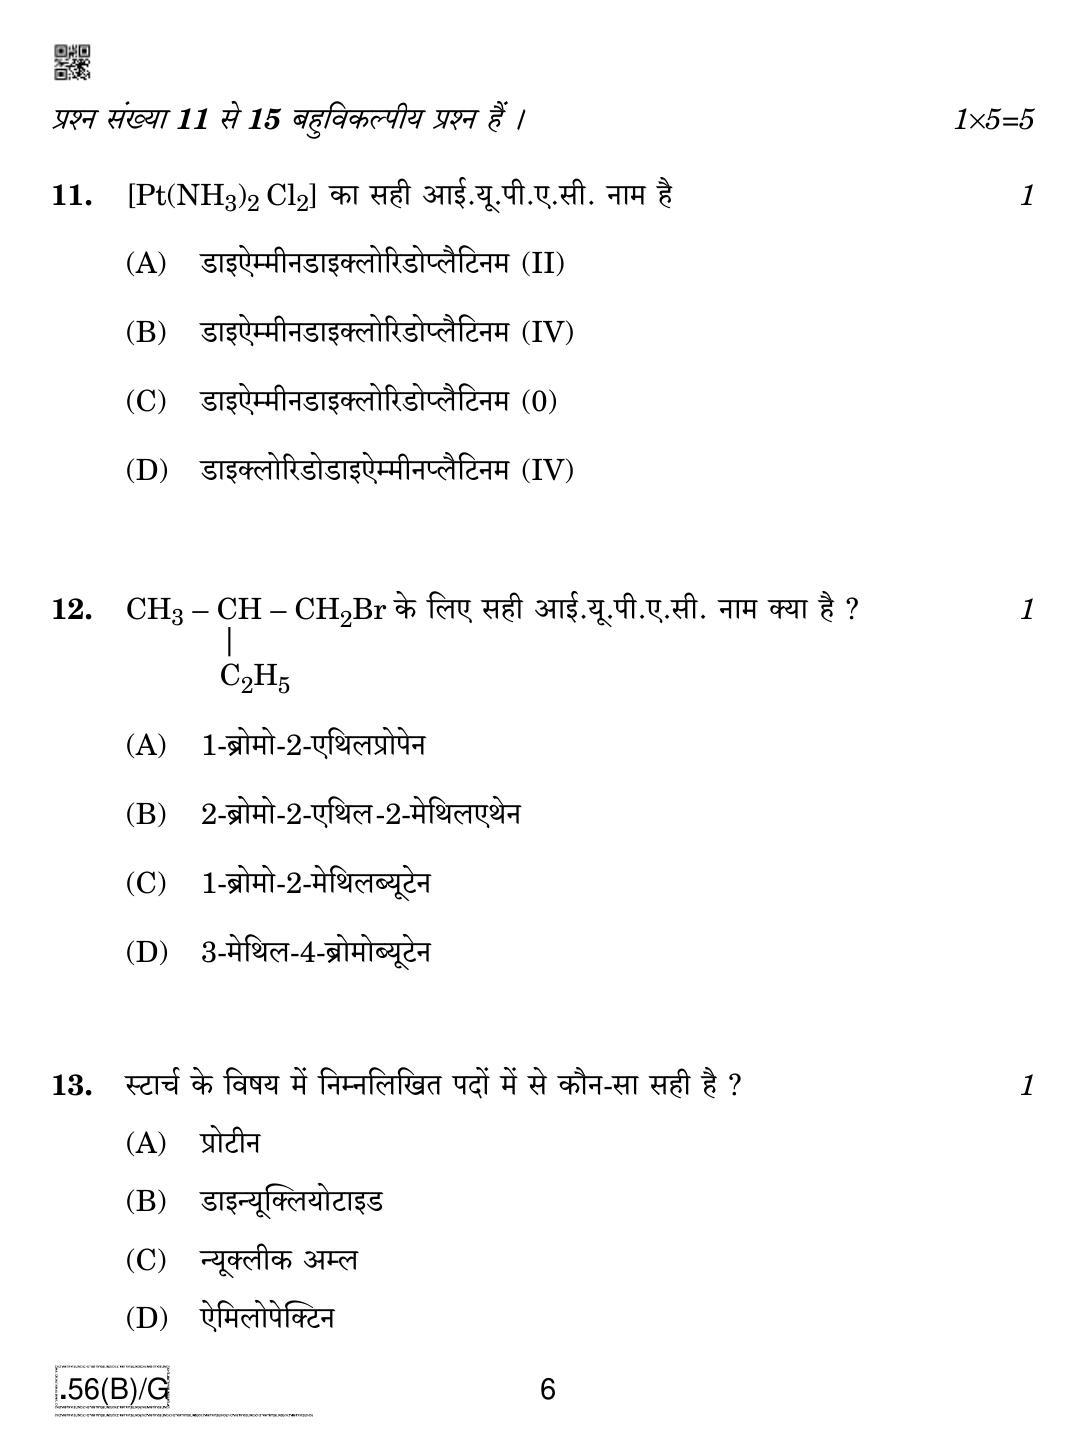 CBSE Class 12 56(B)-C - Chemistry For Blind Candidates 2020 Compartment Question Paper - Page 6